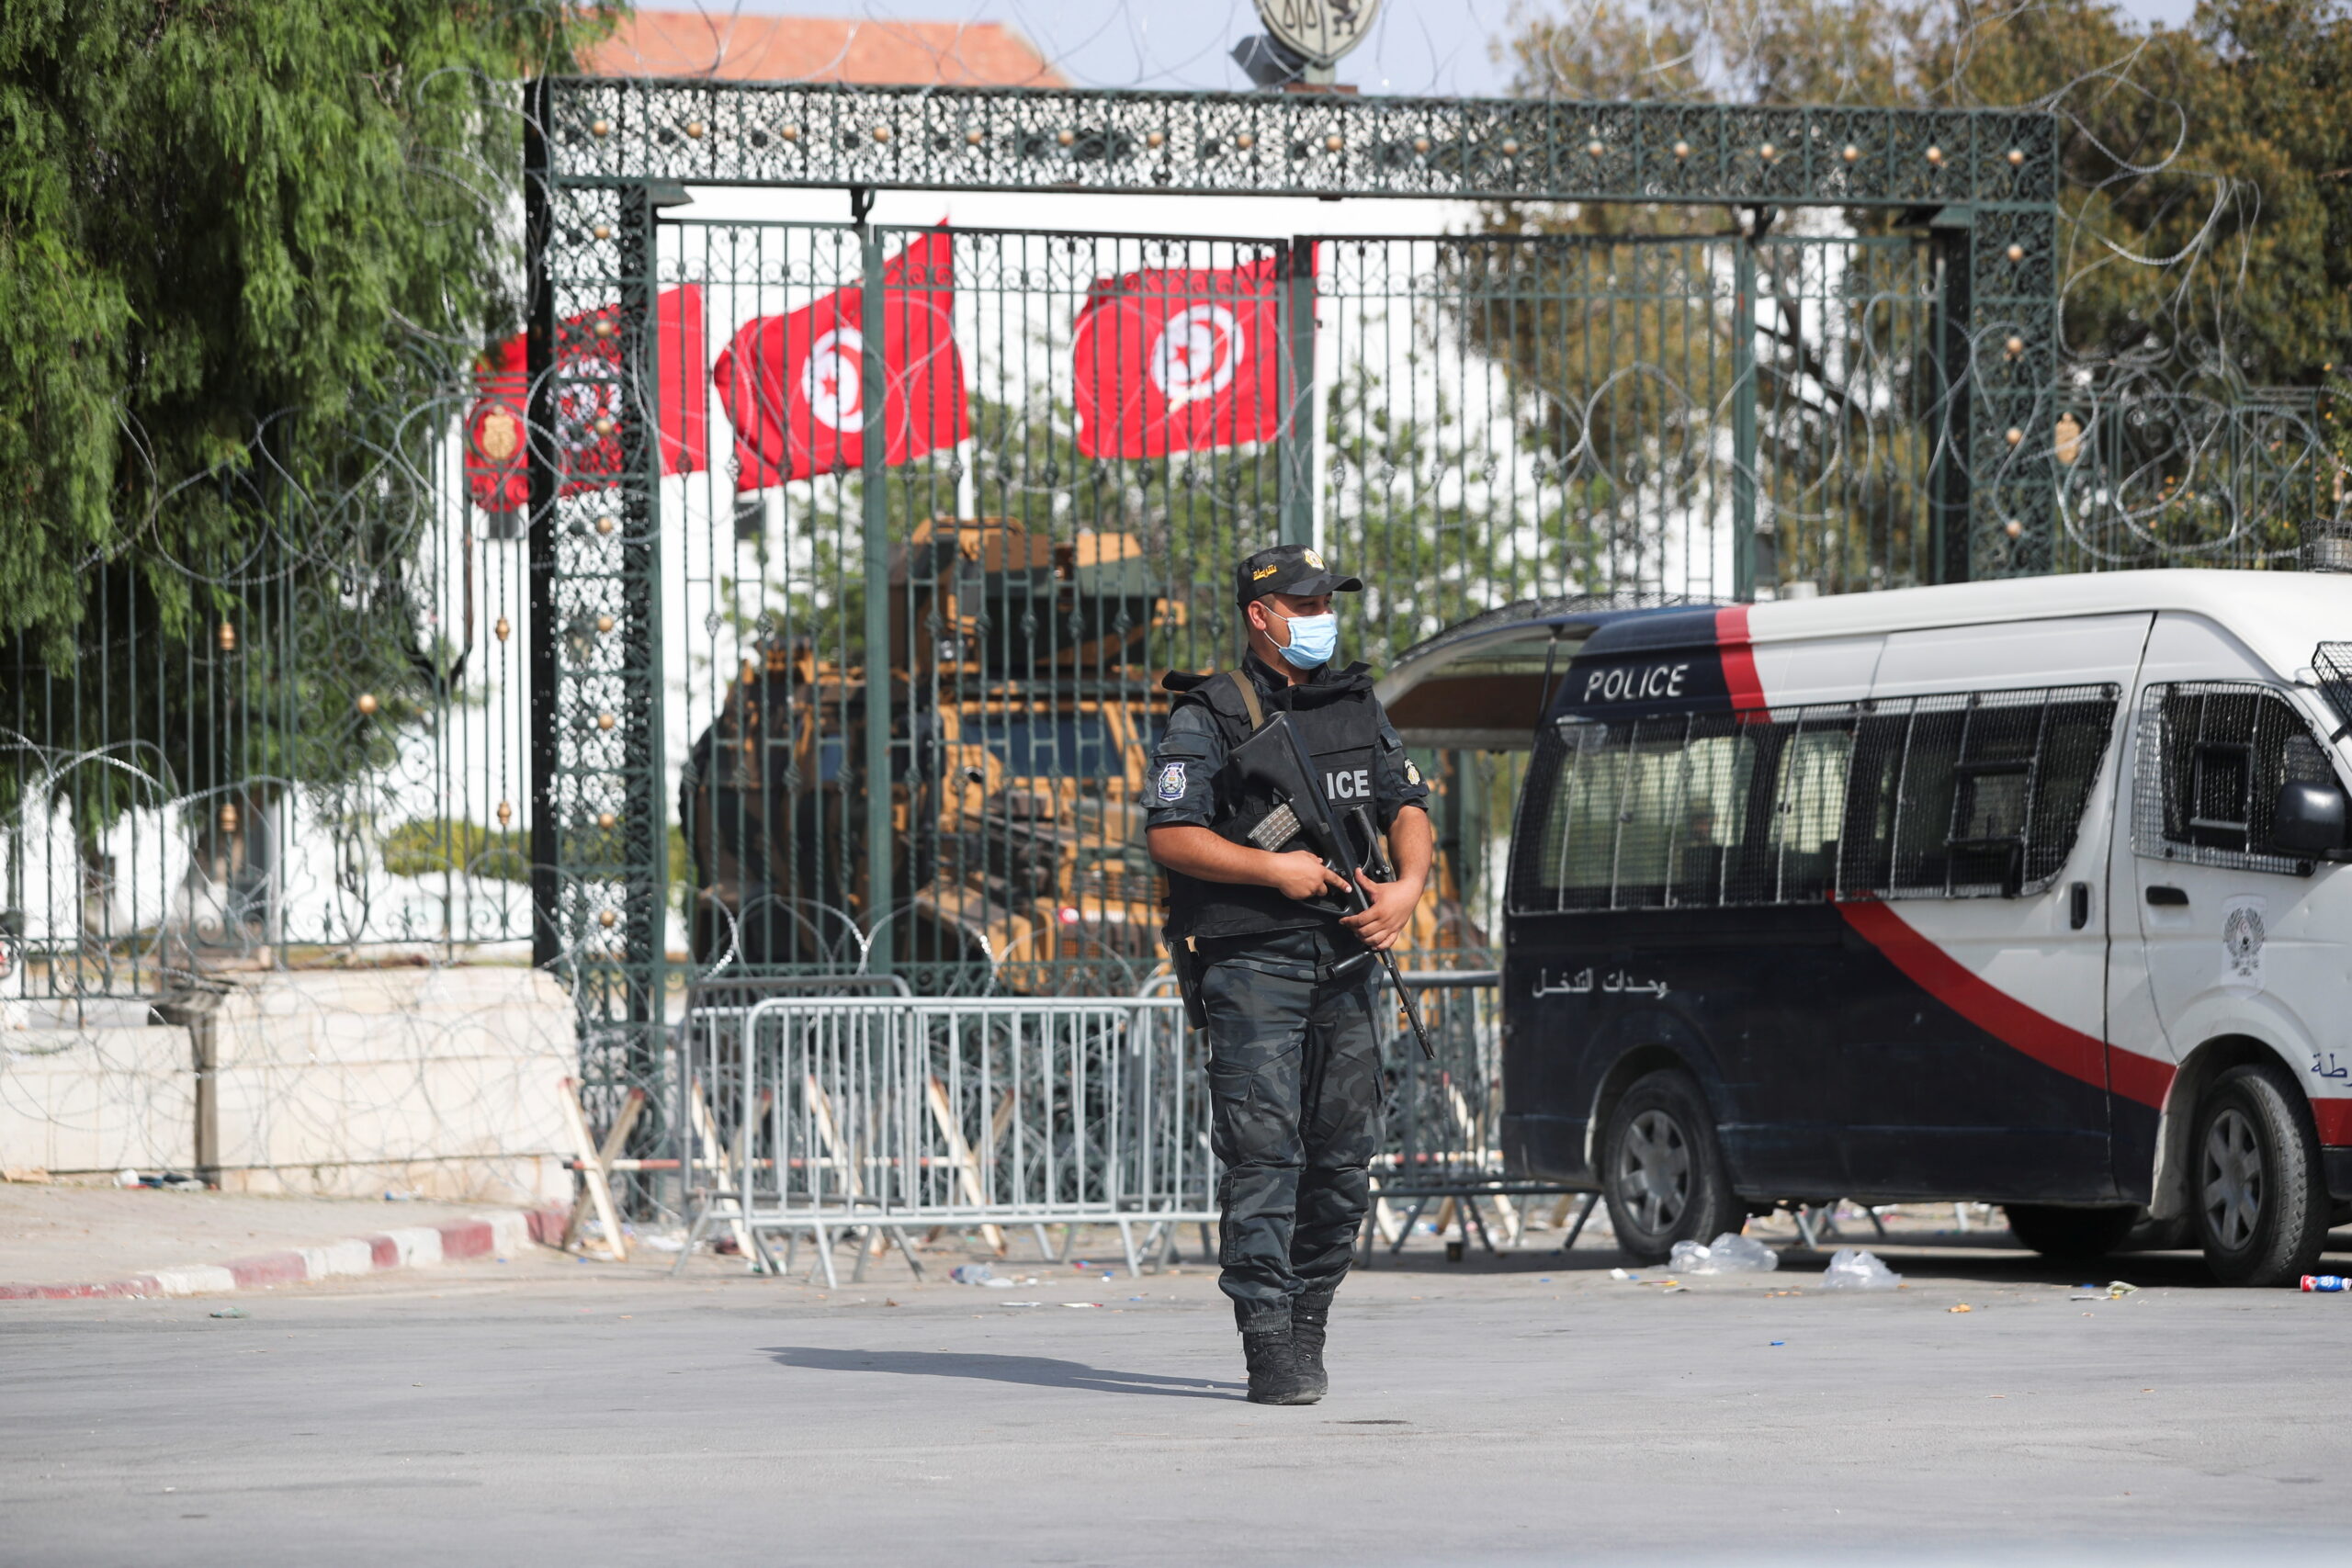 US slams Tunisia’s arrest of lawyers, calls it violation of rights